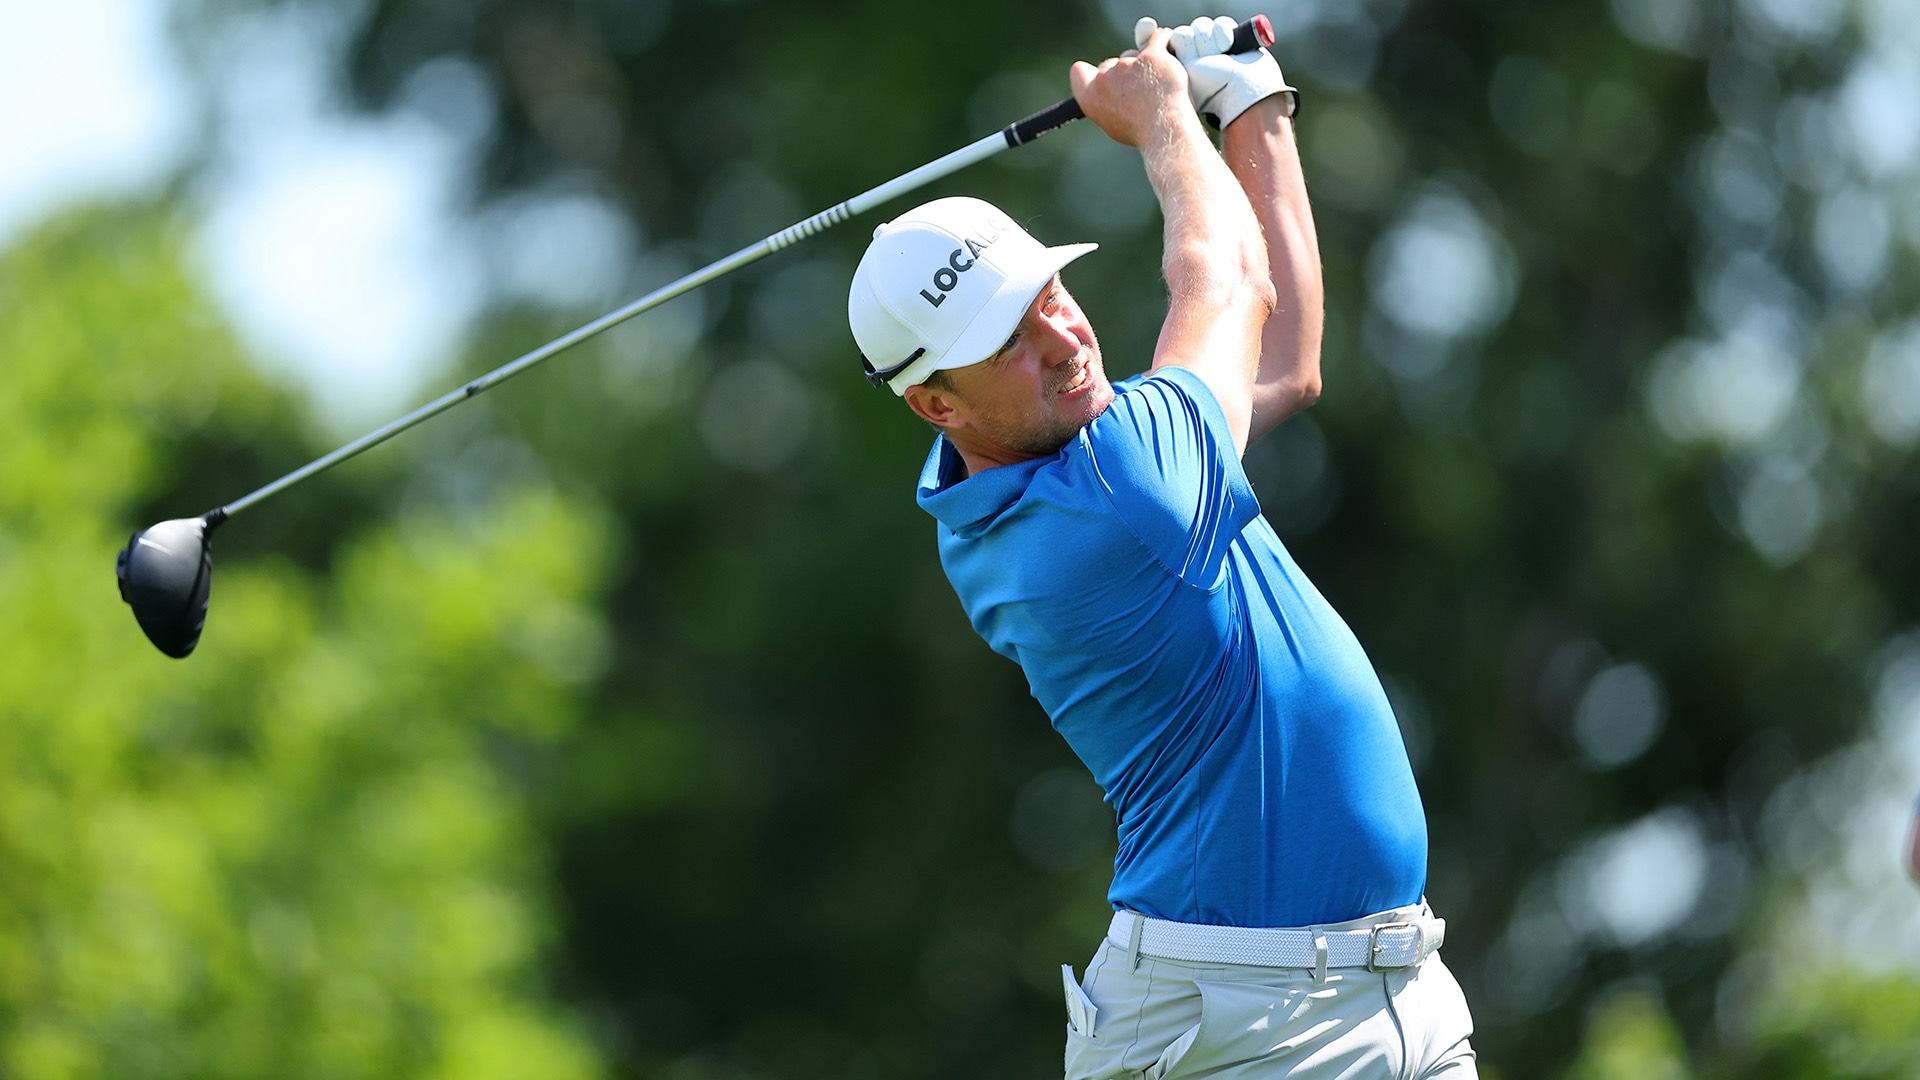 Jonas Blixt gets hot on back 9 at John Deere Classic, takes first-round lead